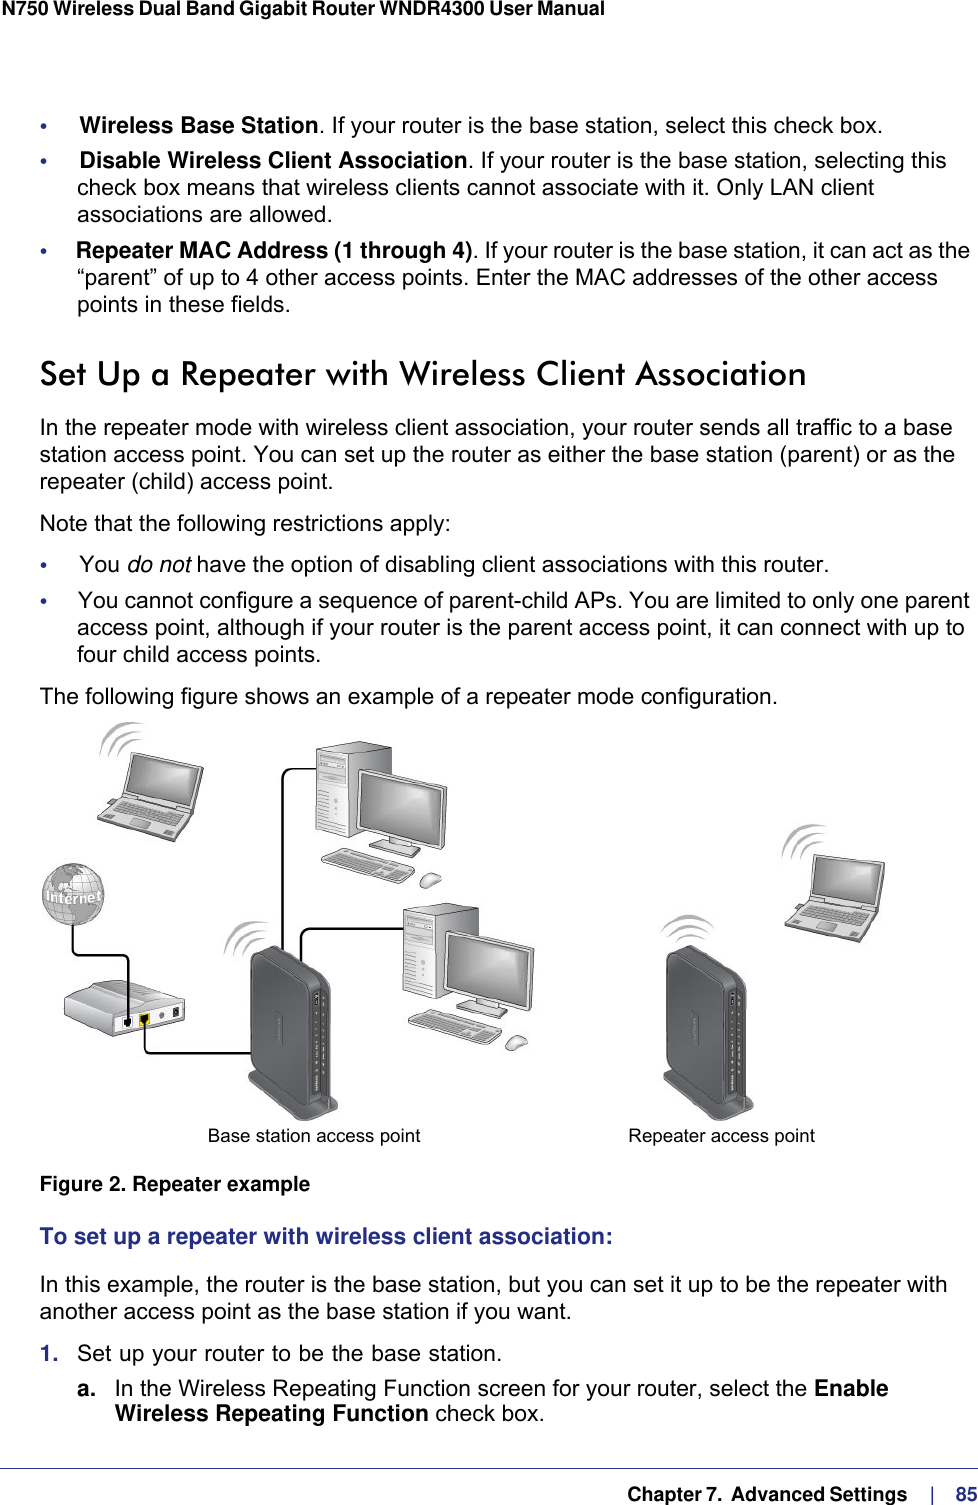   Chapter 7.  Advanced Settings     |    85N750 Wireless Dual Band Gigabit Router WNDR4300 User Manual •     Wireless Base Station. If your router is the base station, select this check box.•     Disable Wireless Client Association. If your router is the base station, selecting this check box means that wireless clients cannot associate with it. Only LAN client associations are allowed.•     Repeater MAC Address (1 through 4). If your router is the base station, it can act as the “parent” of up to 4 other access points. Enter the MAC addresses of the other access points in these fields.Set Up a Repeater with Wireless Client AssociationIn the repeater mode with wireless client association, your router sends all traffic to a base station access point. You can set up the router as either the base station (parent) or as the repeater (child) access point. Note that the following restrictions apply:•     You do not have the option of disabling client associations with this router. •     You cannot configure a sequence of parent-child APs. You are limited to only one parent access point, although if your router is the parent access point, it can connect with up to four child access points. The following figure shows an example of a repeater mode configuration.Repeater access pointBase station access point Figure 2. Repeater exampleTo set up a repeater with wireless client association:In this example, the router is the base station, but you can set it up to be the repeater with another access point as the base station if you want.1.  Set up your router to be the base station.a. In the Wireless Repeating Function screen for your router, select the Enable Wireless Repeating Function check box.